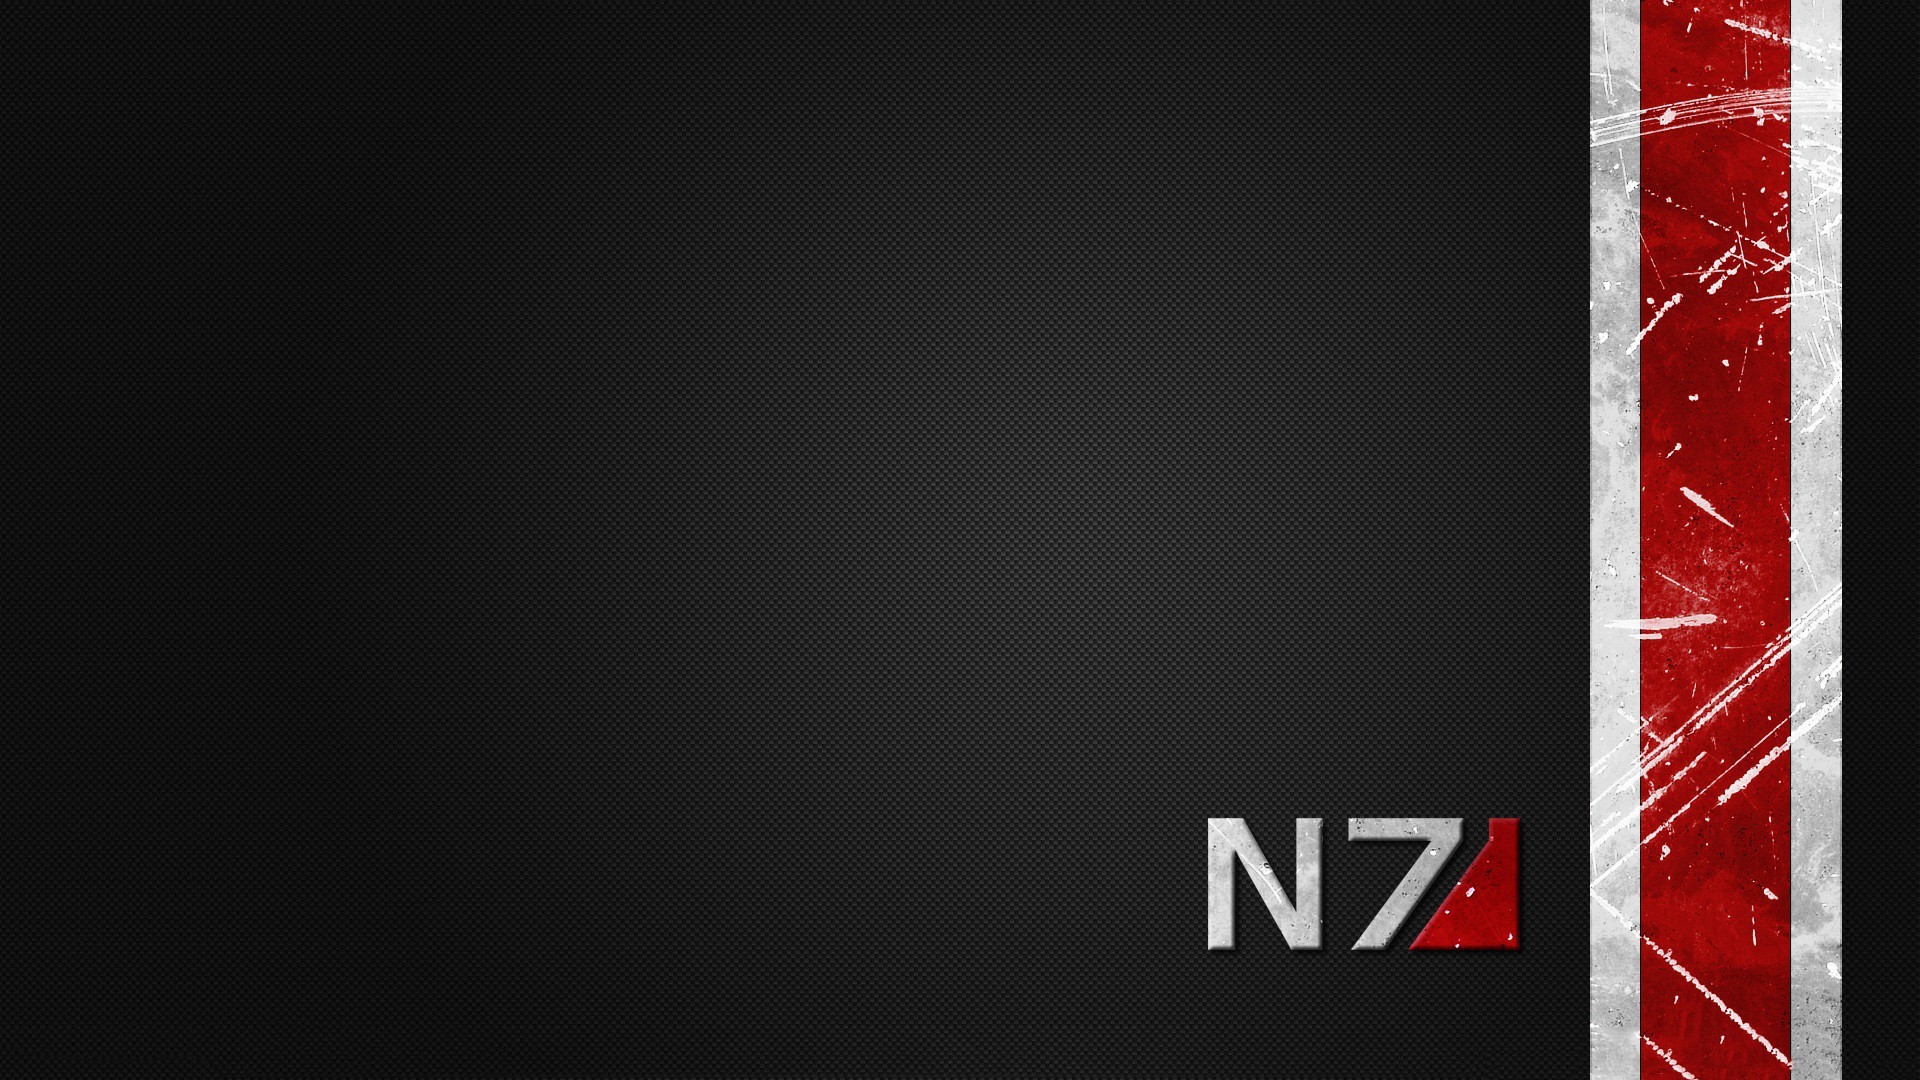 General 1920x1080 Mass Effect video games minimalism numbers video game art science fiction